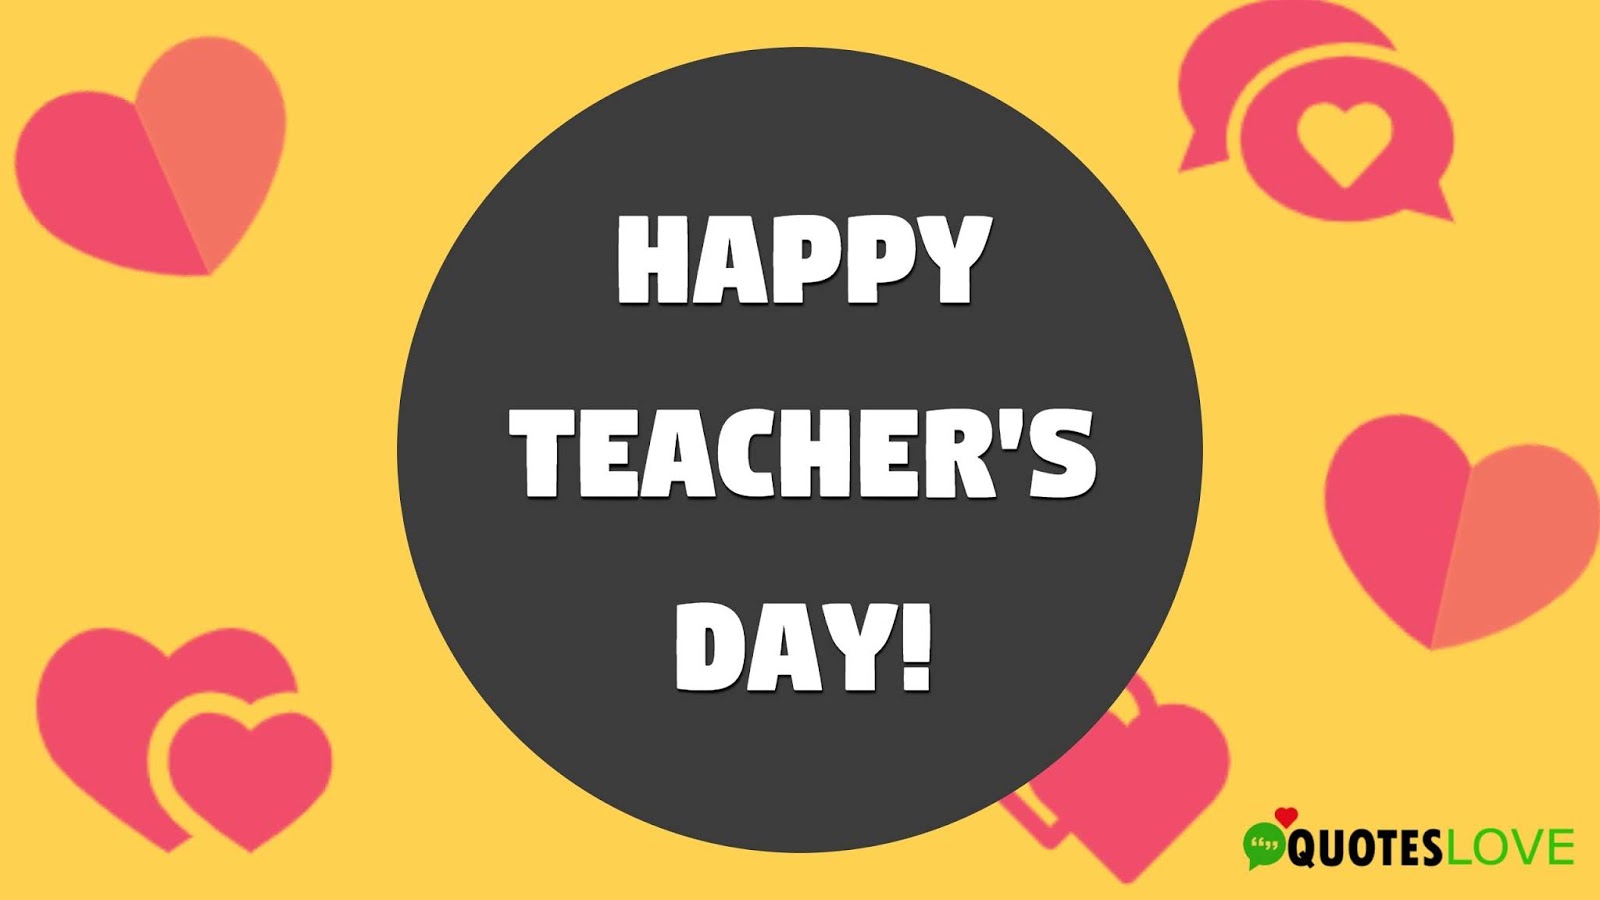 60+ (New) Happy Teachers Day Quotes, Status, Wishes, Images and Messages for Year 2019